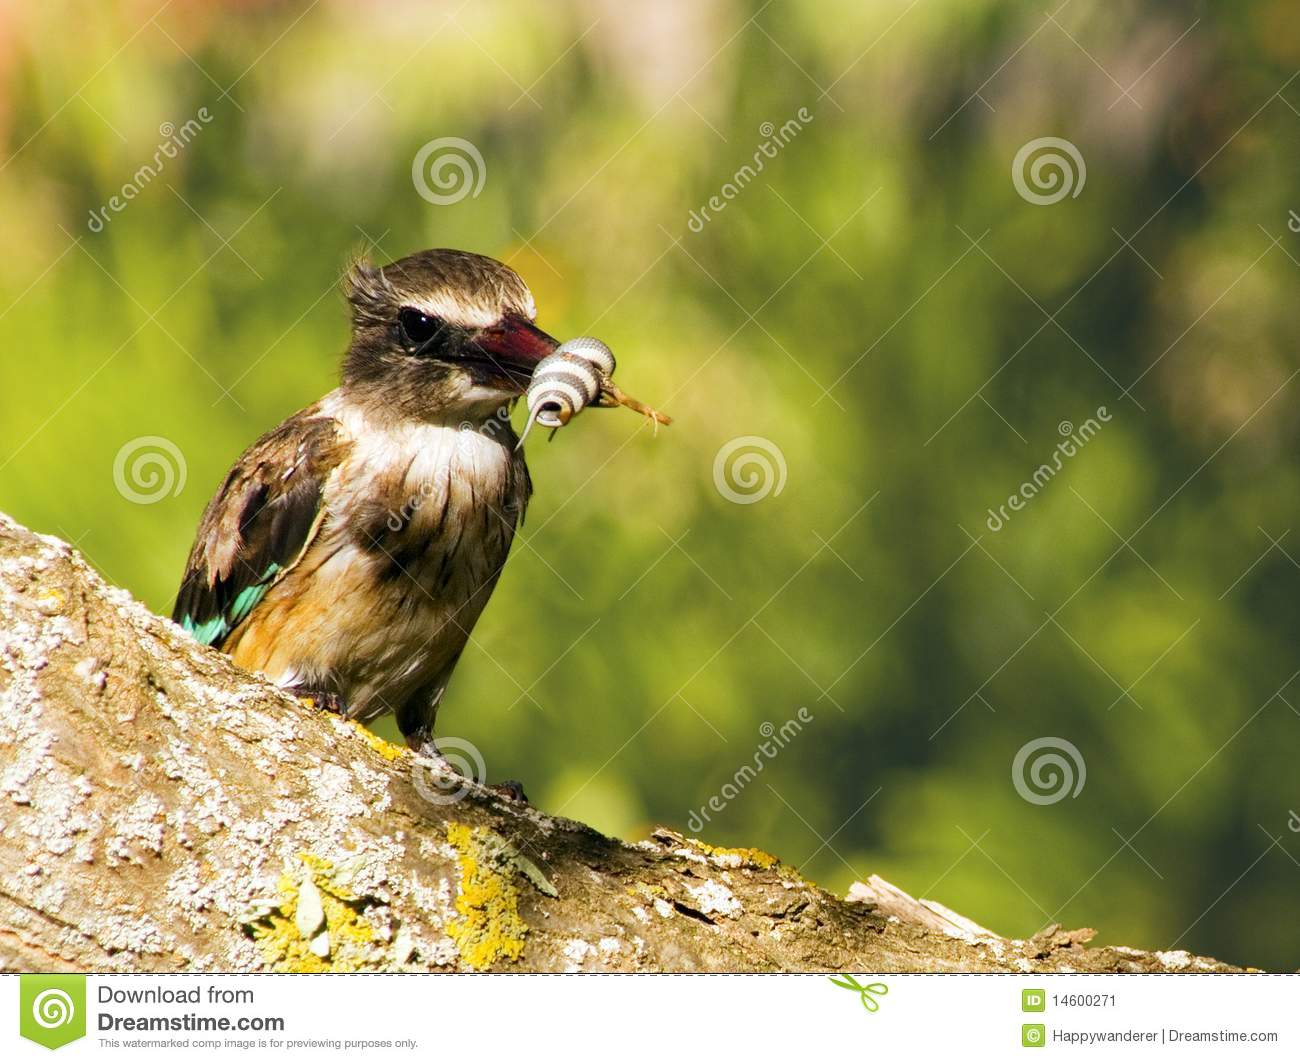 Early Bird Catches The Worm Stock Image   Image  14600271